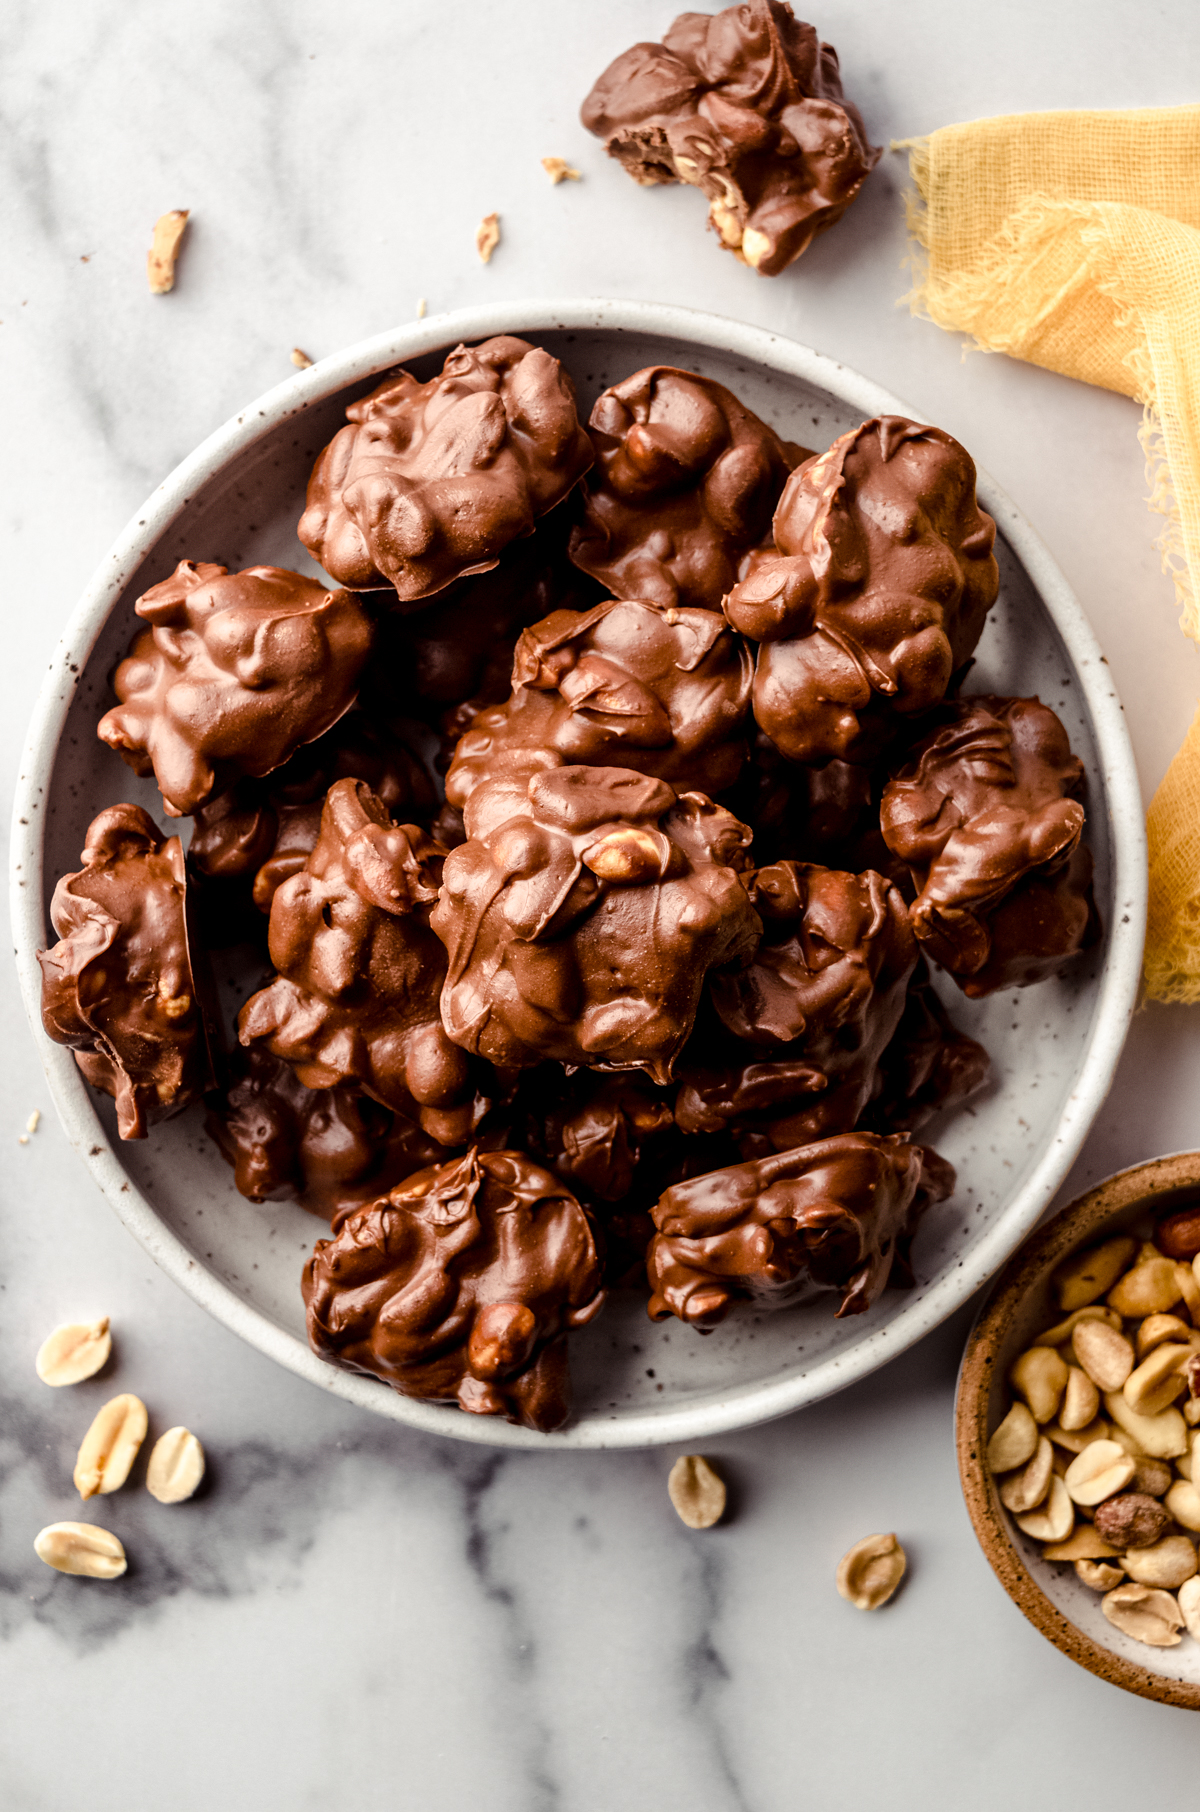 Aerial photo of slow cooker peanut clusters on a plate.